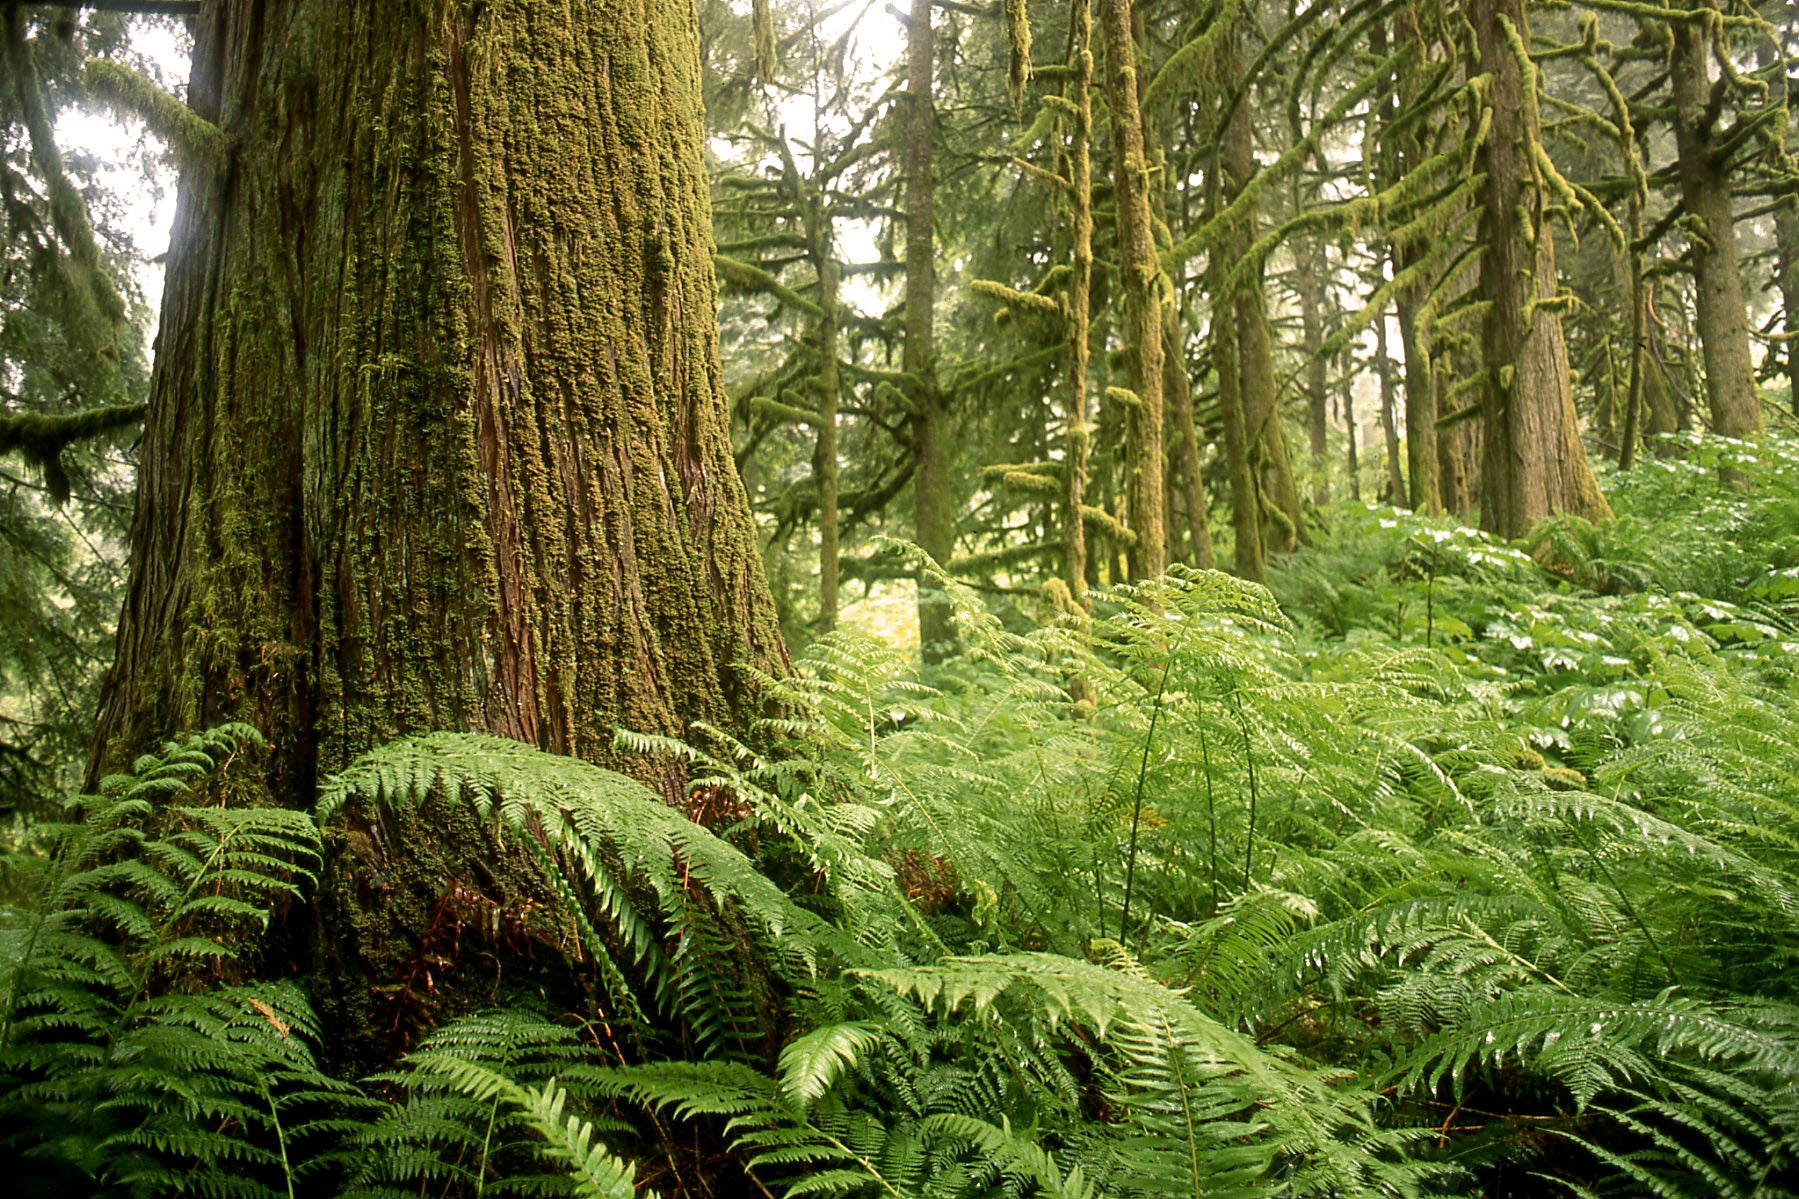 Several trees with heavy moss on them. There is a field of ferns. End of image description.